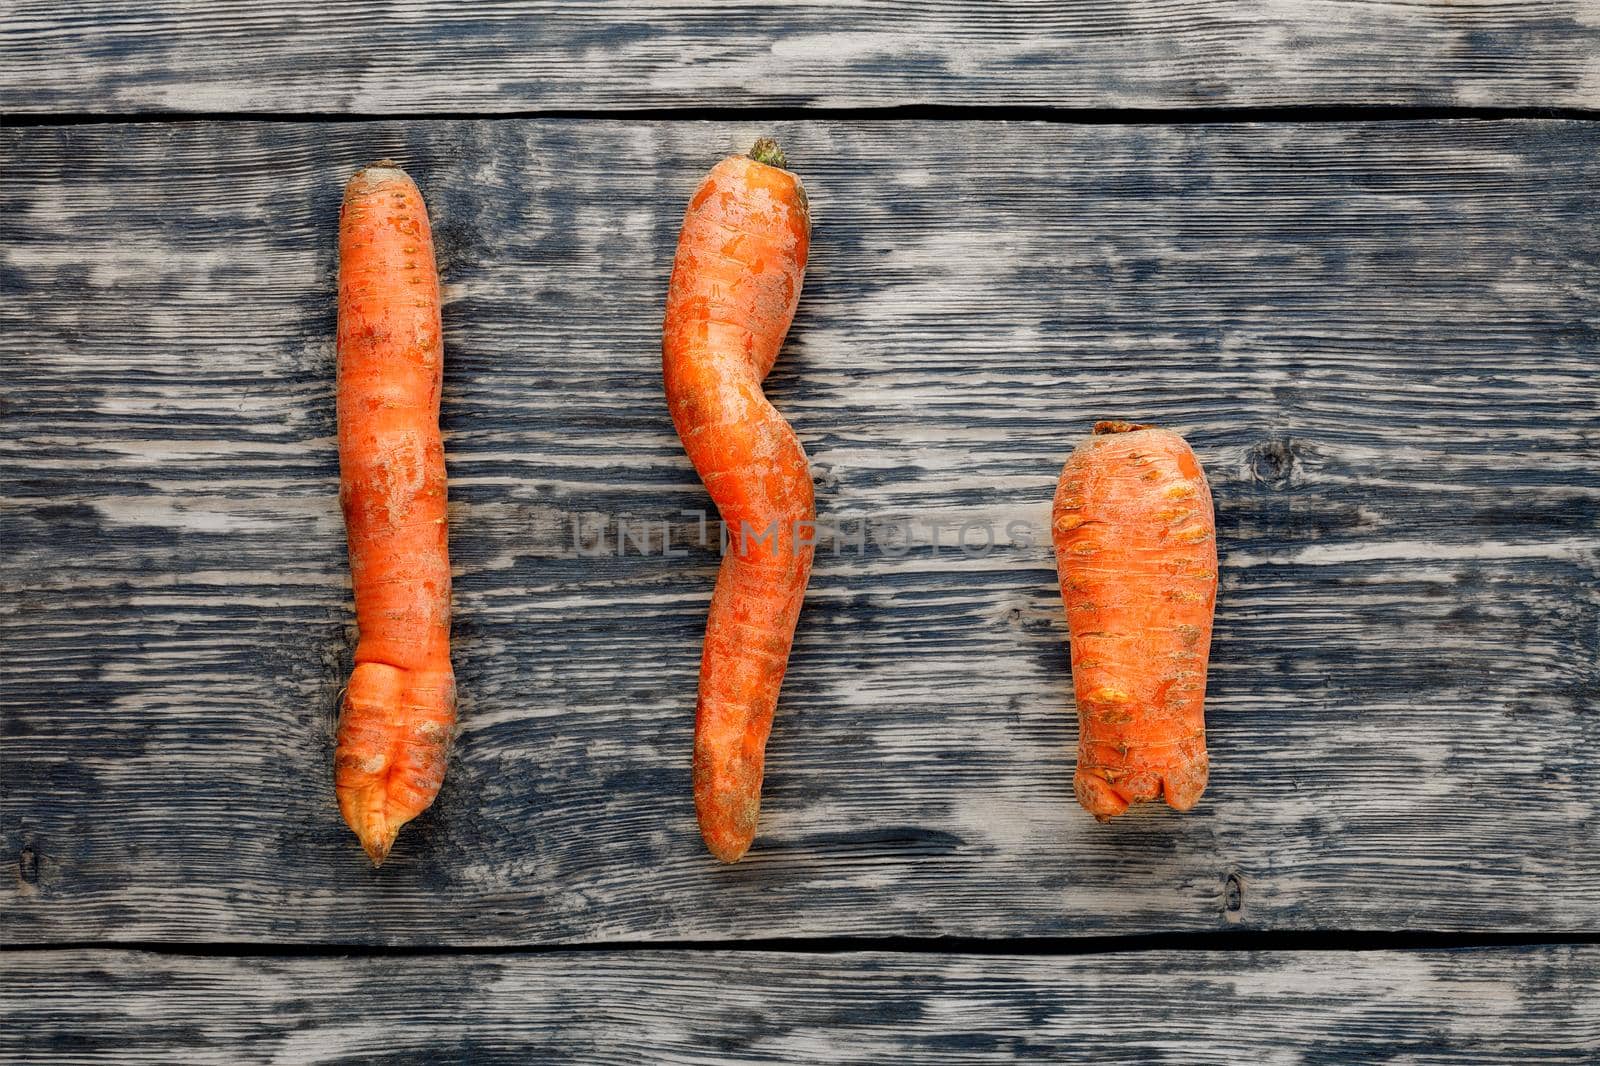 Trendy good vegetables, three carrots of a strange ugly shape on a gray wooden background. by Sergii